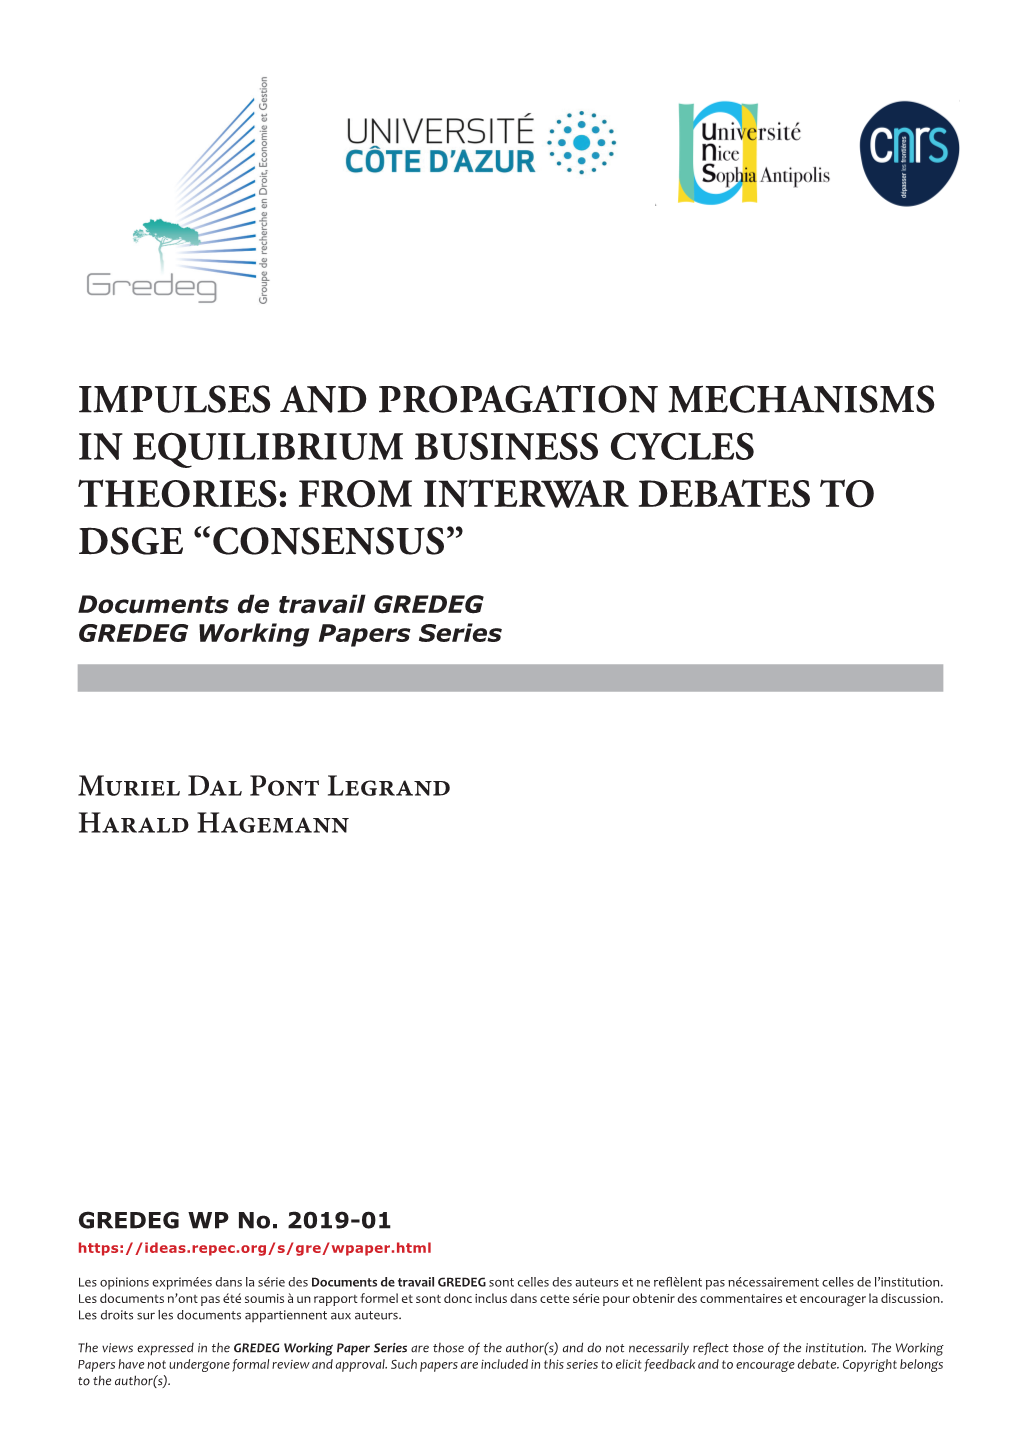 Impulses and Propagation Mechanisms in Equilibrium Business Cycles Theories: from Interwar Debates to DSGE “Consensus”